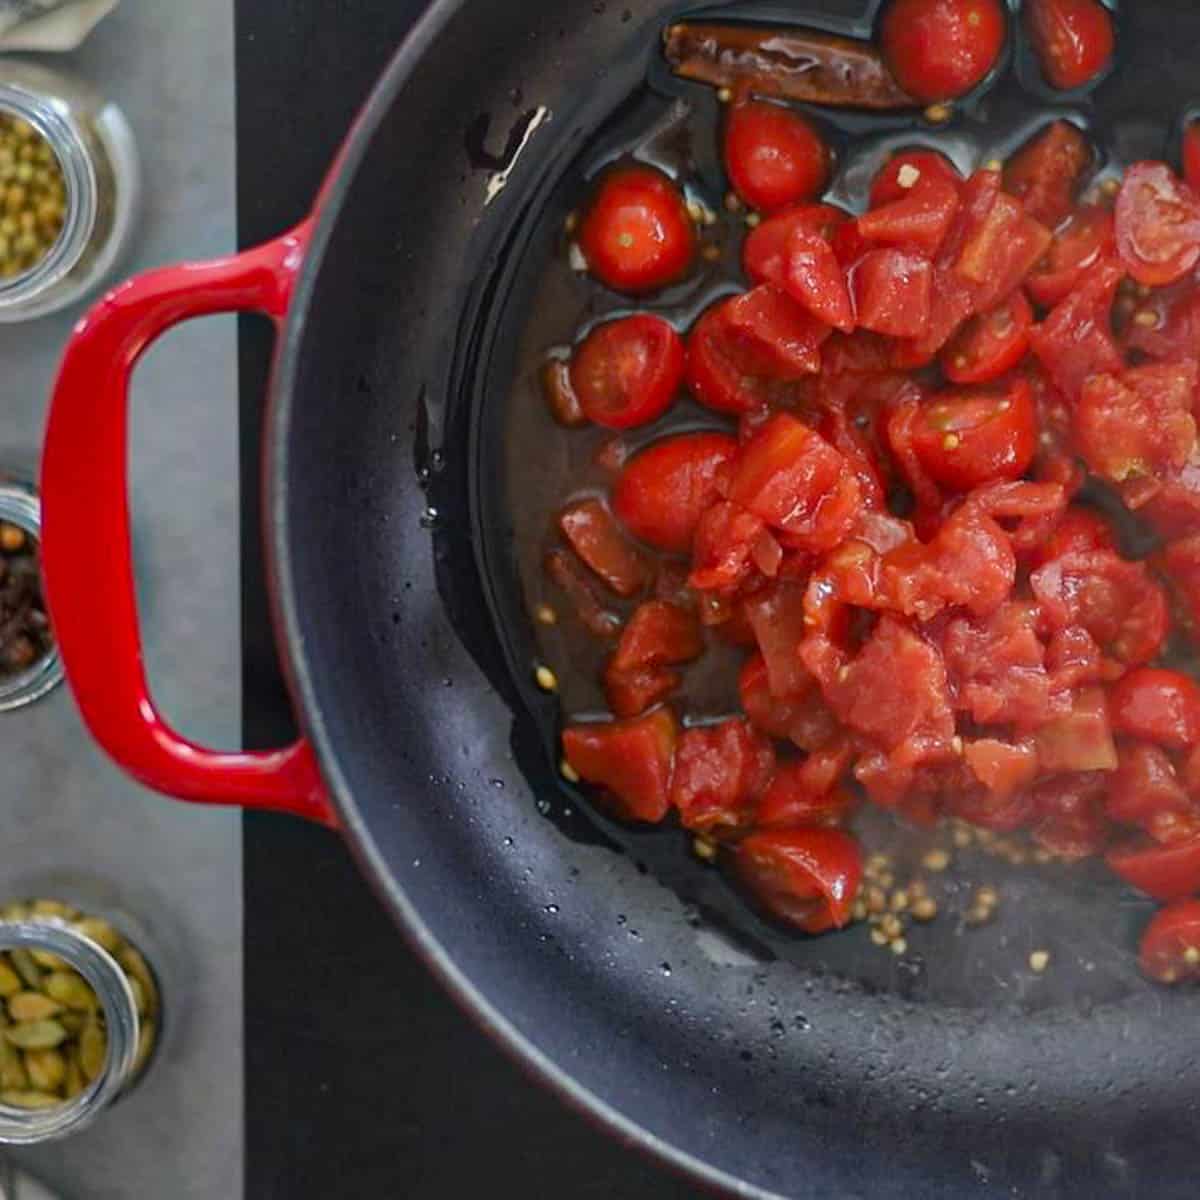 Saute tomatoes in oil until soft & mushy.